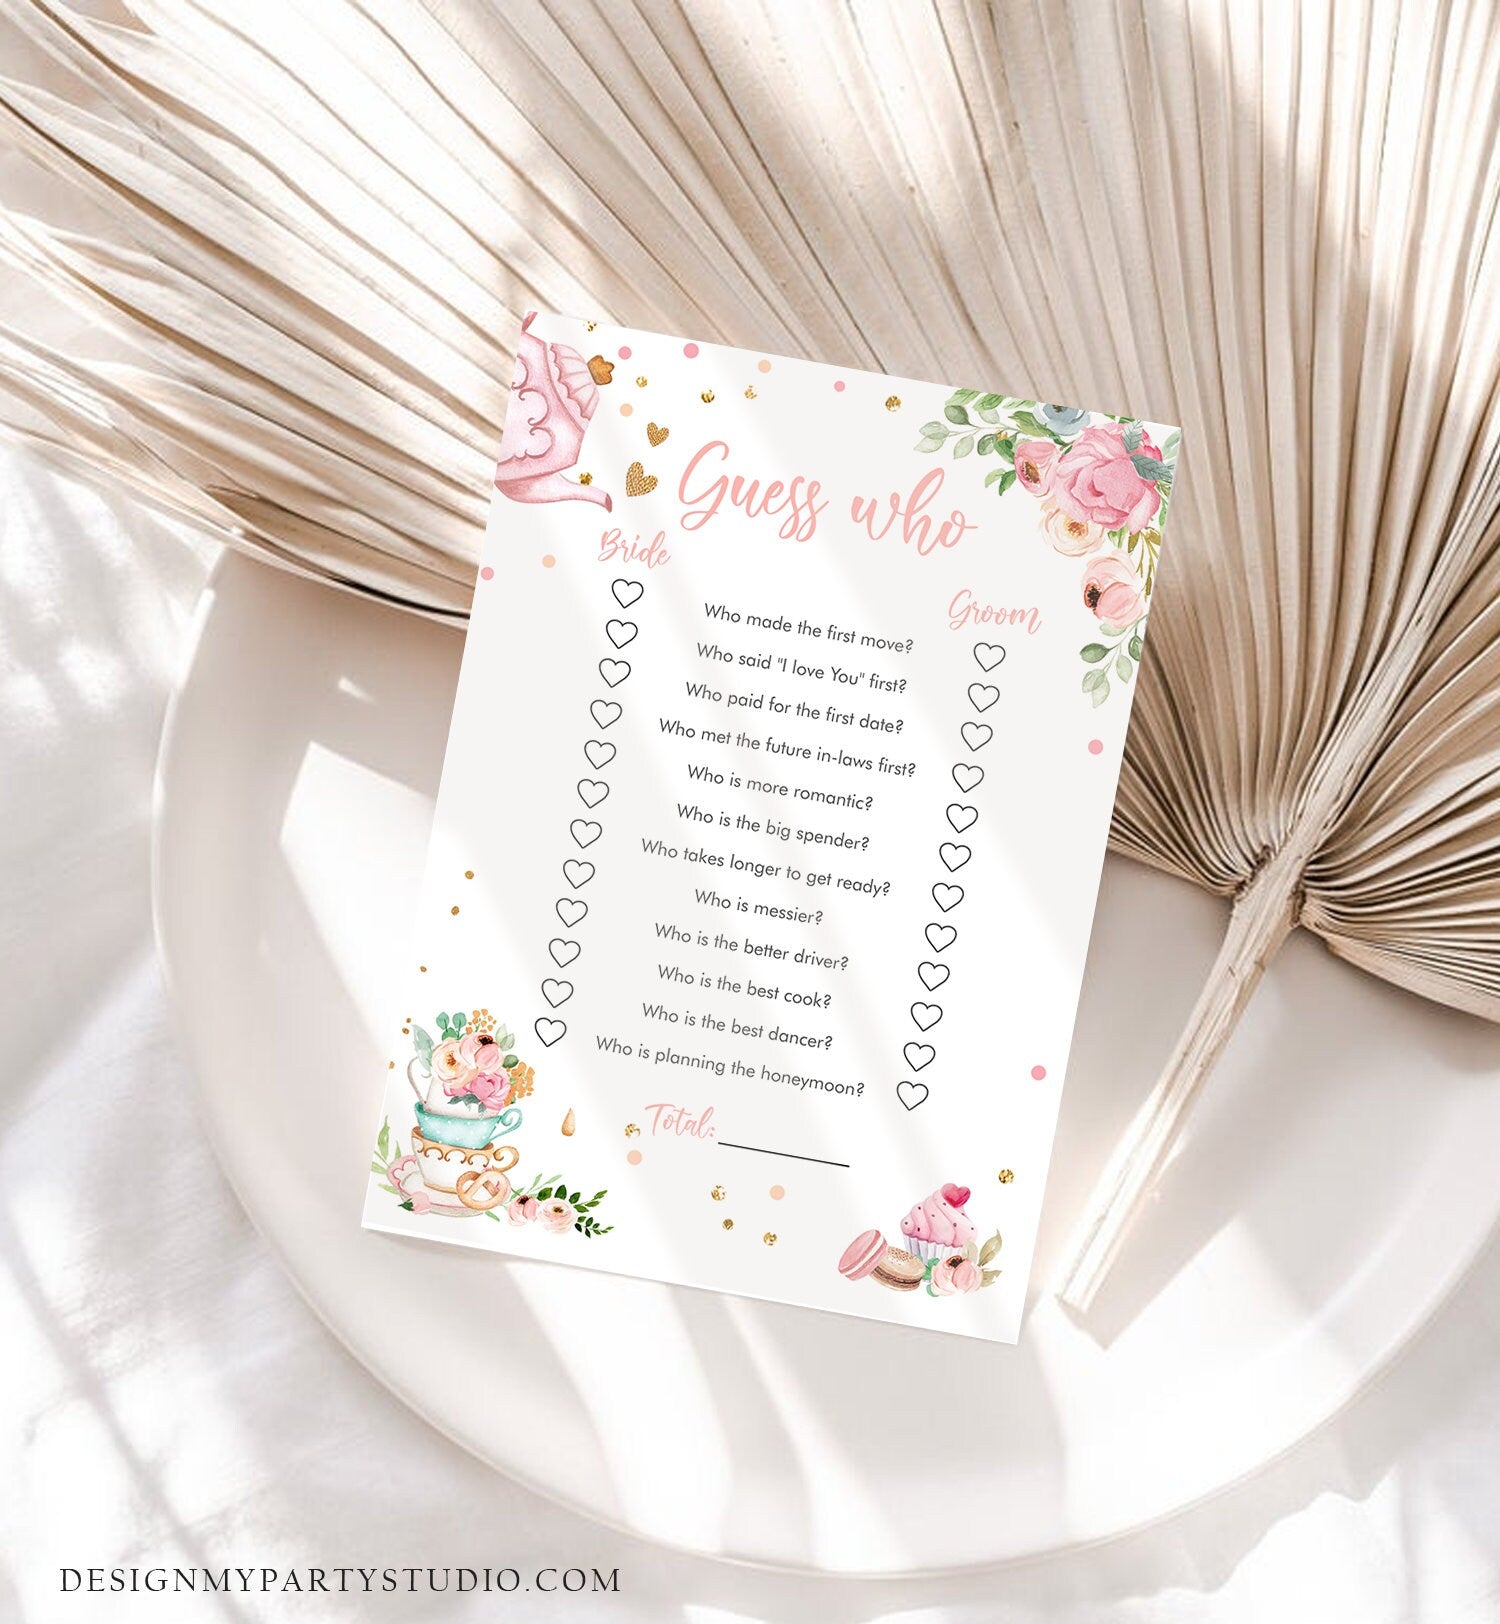 Editable Guess Who Bridal Shower Game Greenery Tea Party Baby is Brewing Pink Rustic Watercolor Bride Groom Corjl Template Printable 0349